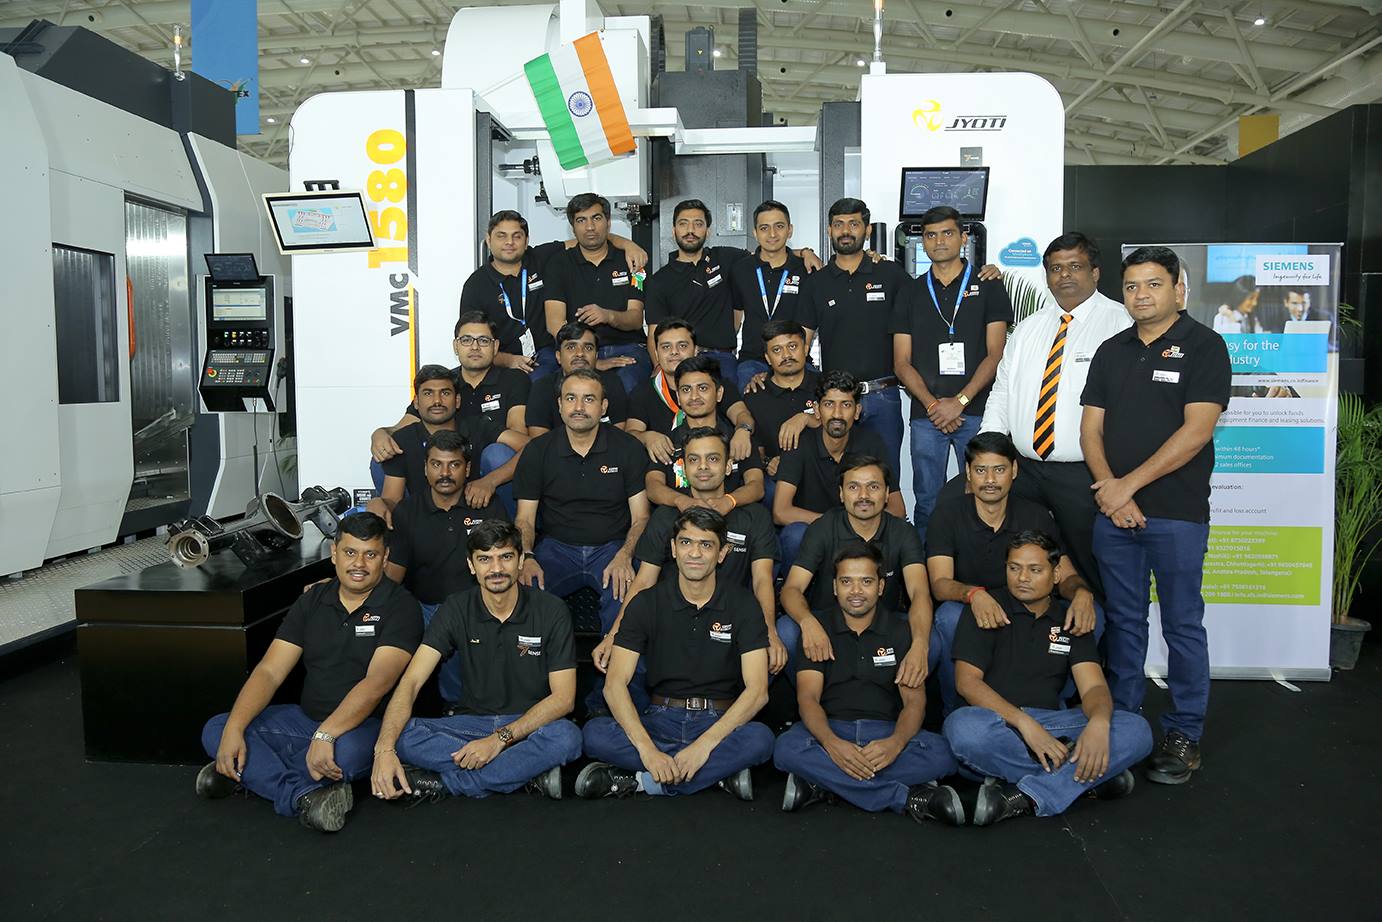 Jyoti Stands out at Imtex'19 with an Artificial Intelligence and other class apart cutting edge technologies on the display !